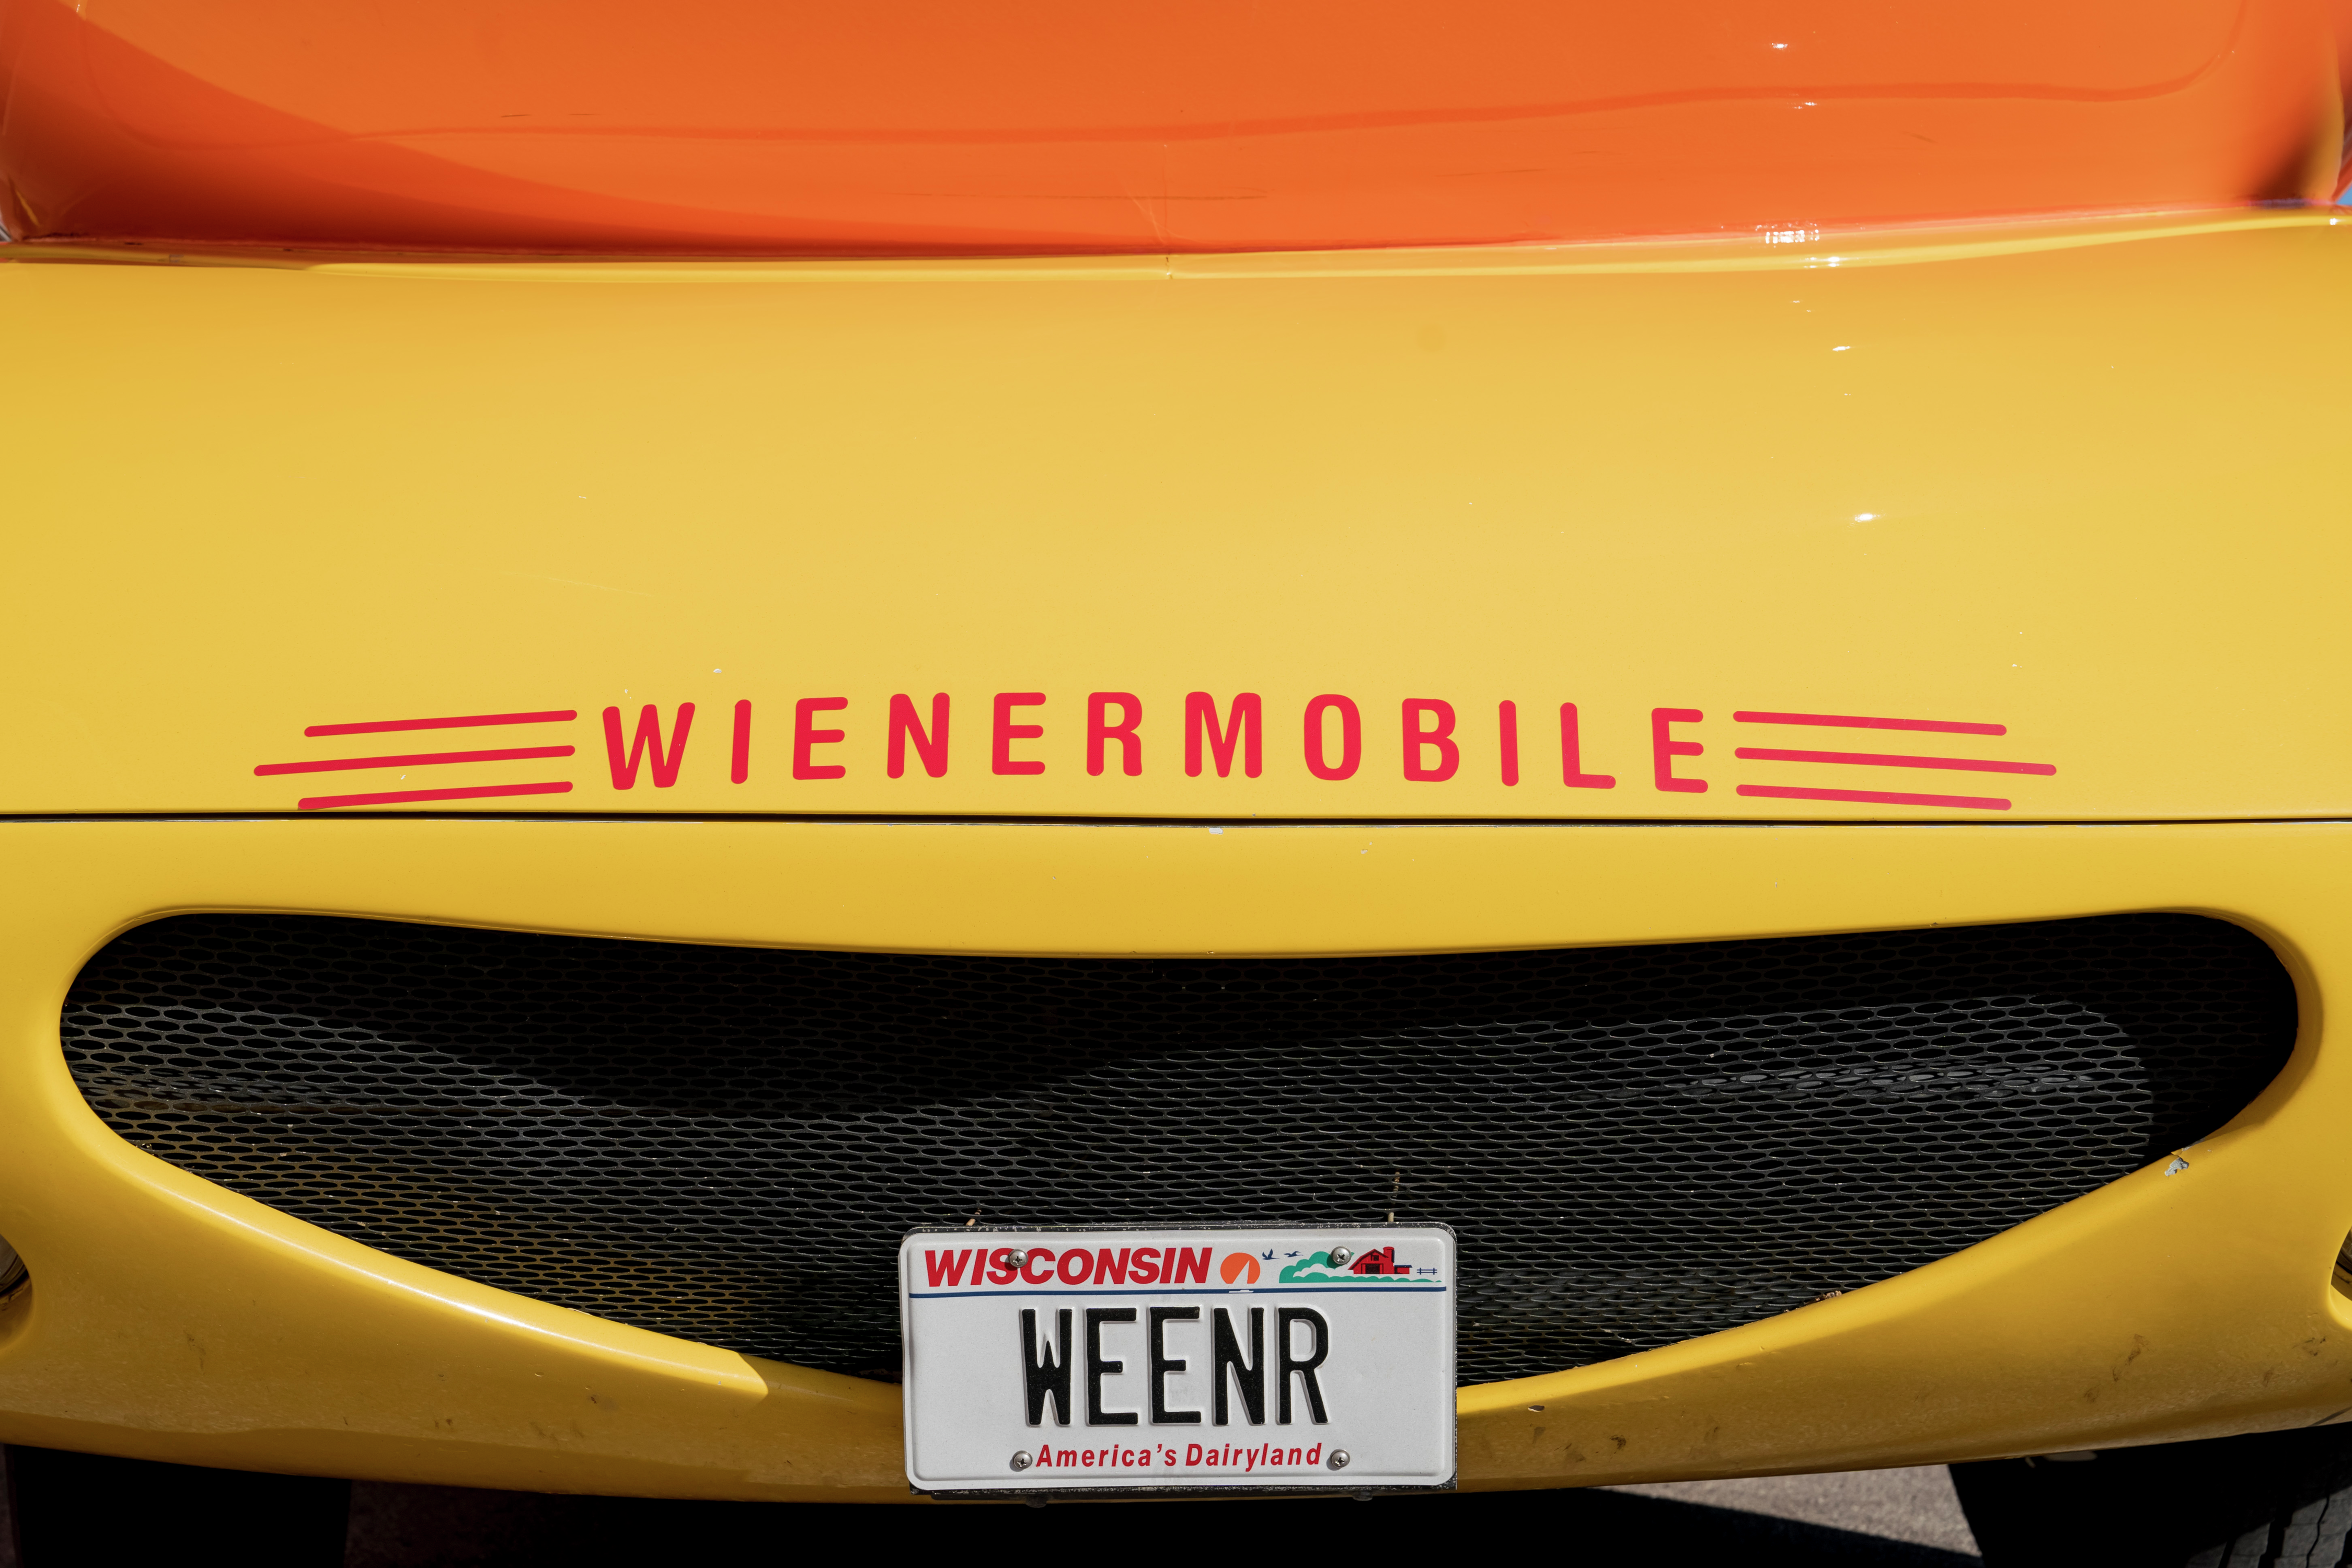 Oscar Meyer Wienermobile involved in crash on Tri-State Tollway